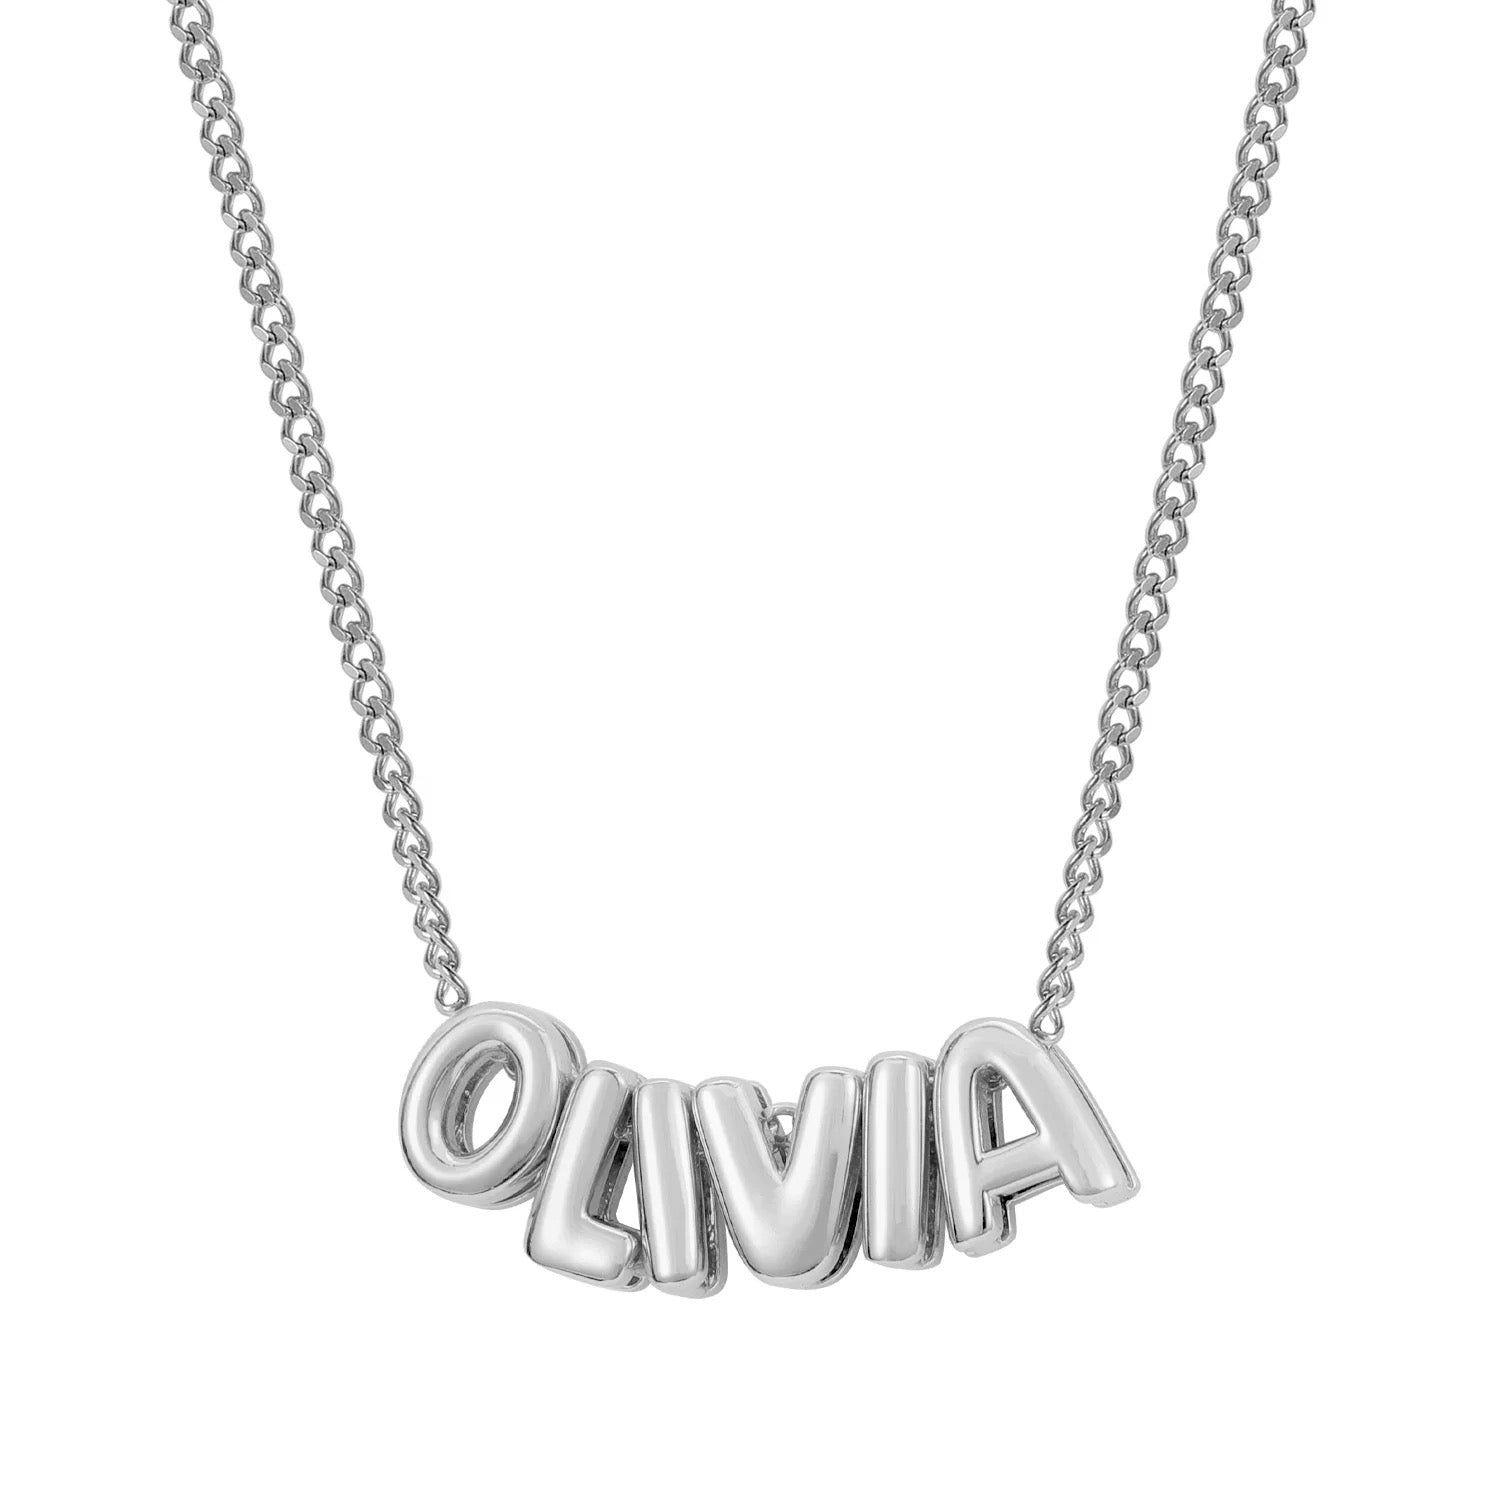 Personalised Bubble Name Necklace-Silver-Elevate your style with a personalized touch! Order your personalised bubble name necklace now to add a unique accessory to your collection. Don't miss out!-Dazzledvenus